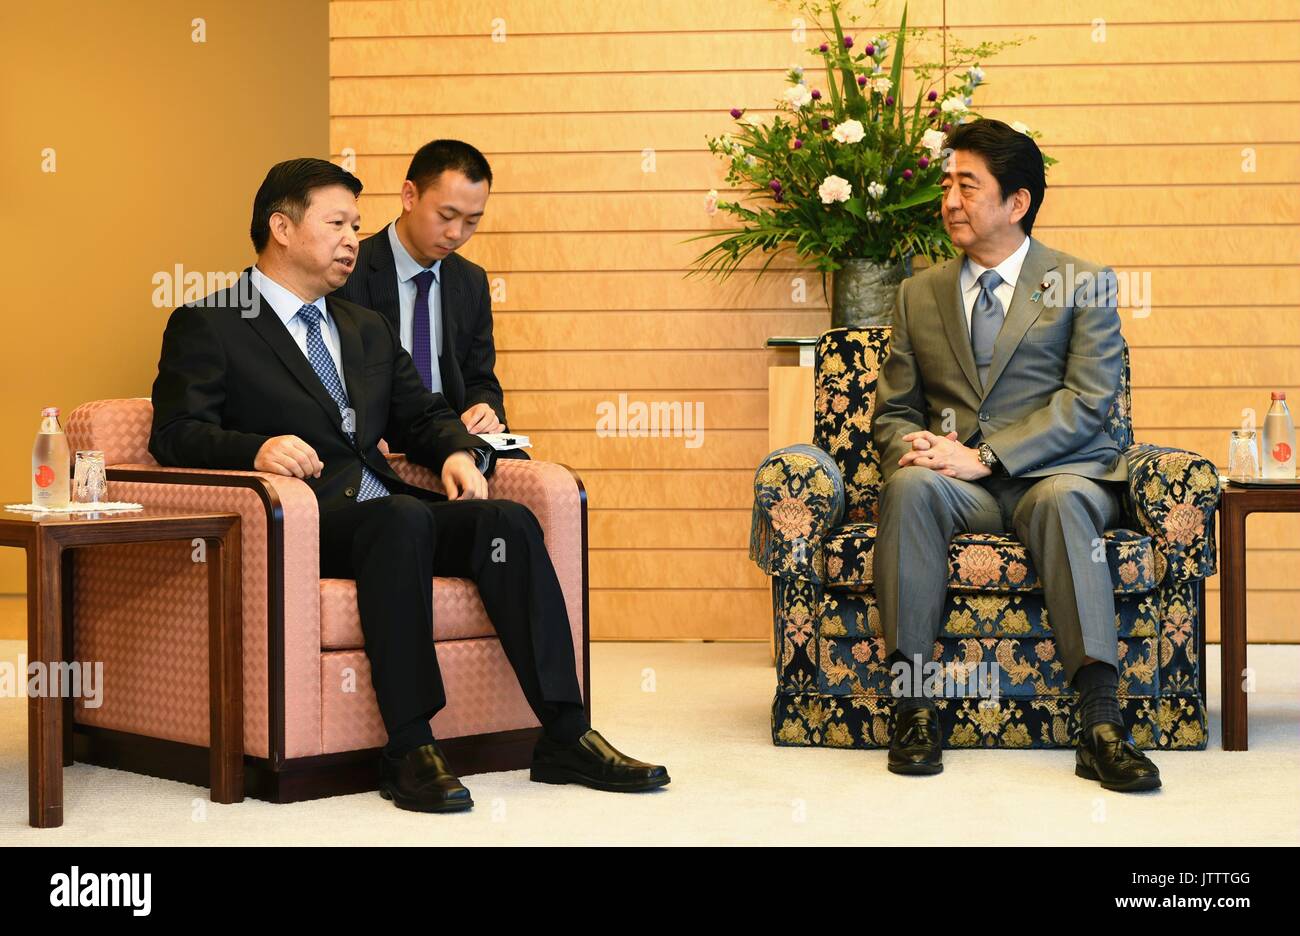 Tokyo, Japan. 8th Aug, 2017. Japanese Prime Minister and Liberal Democratic Party President Shinzo Abe meets with Song Tao (L), head of the International Department of the Communist Party of China Central Committee in Tokyo, Japan, Aug. 8, 2017. Credit: Hua Yi/Xinhua/Alamy Live News Stock Photo